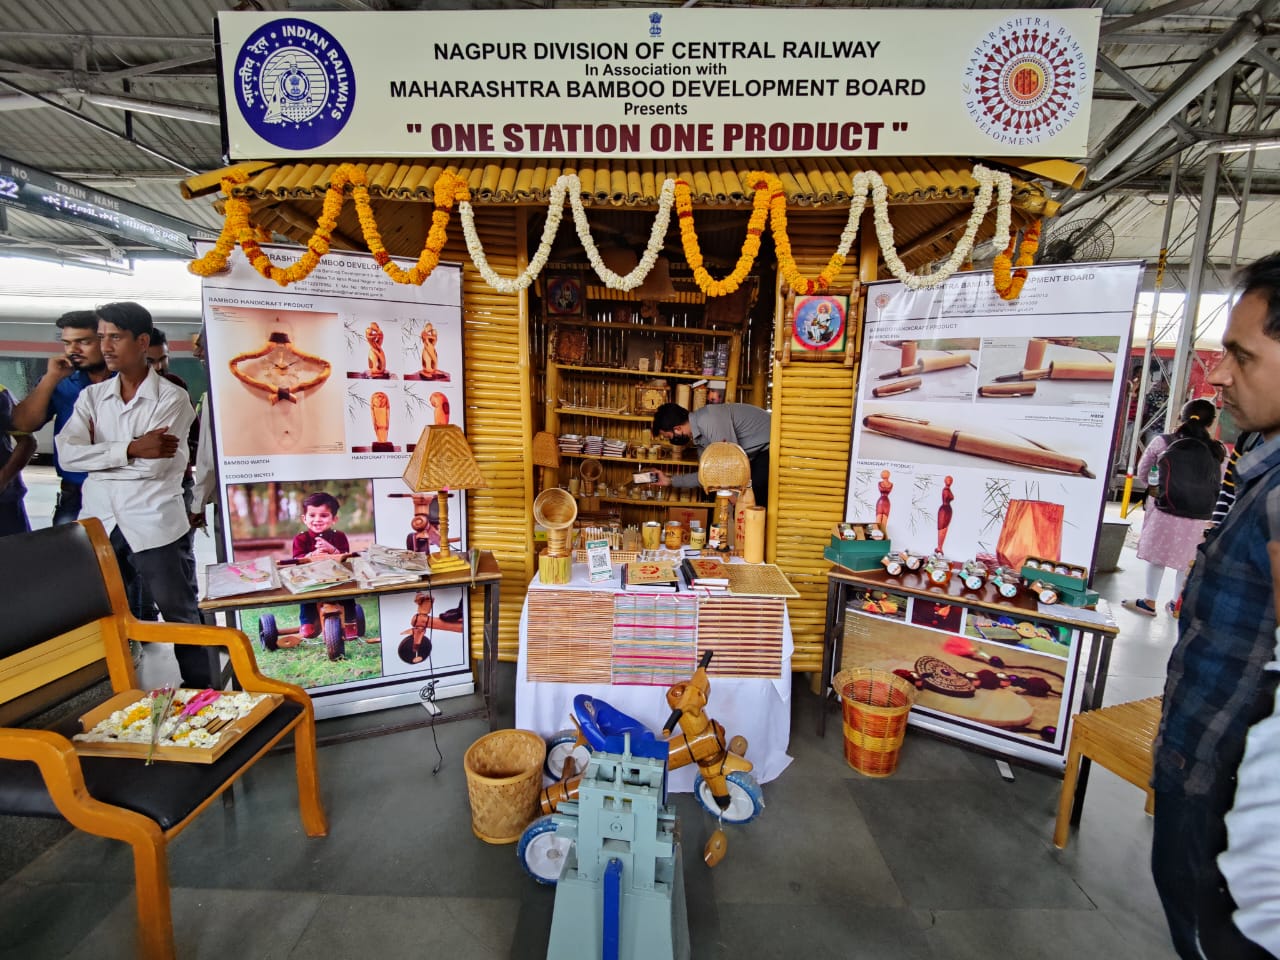 Stalls also set up at many railway stations